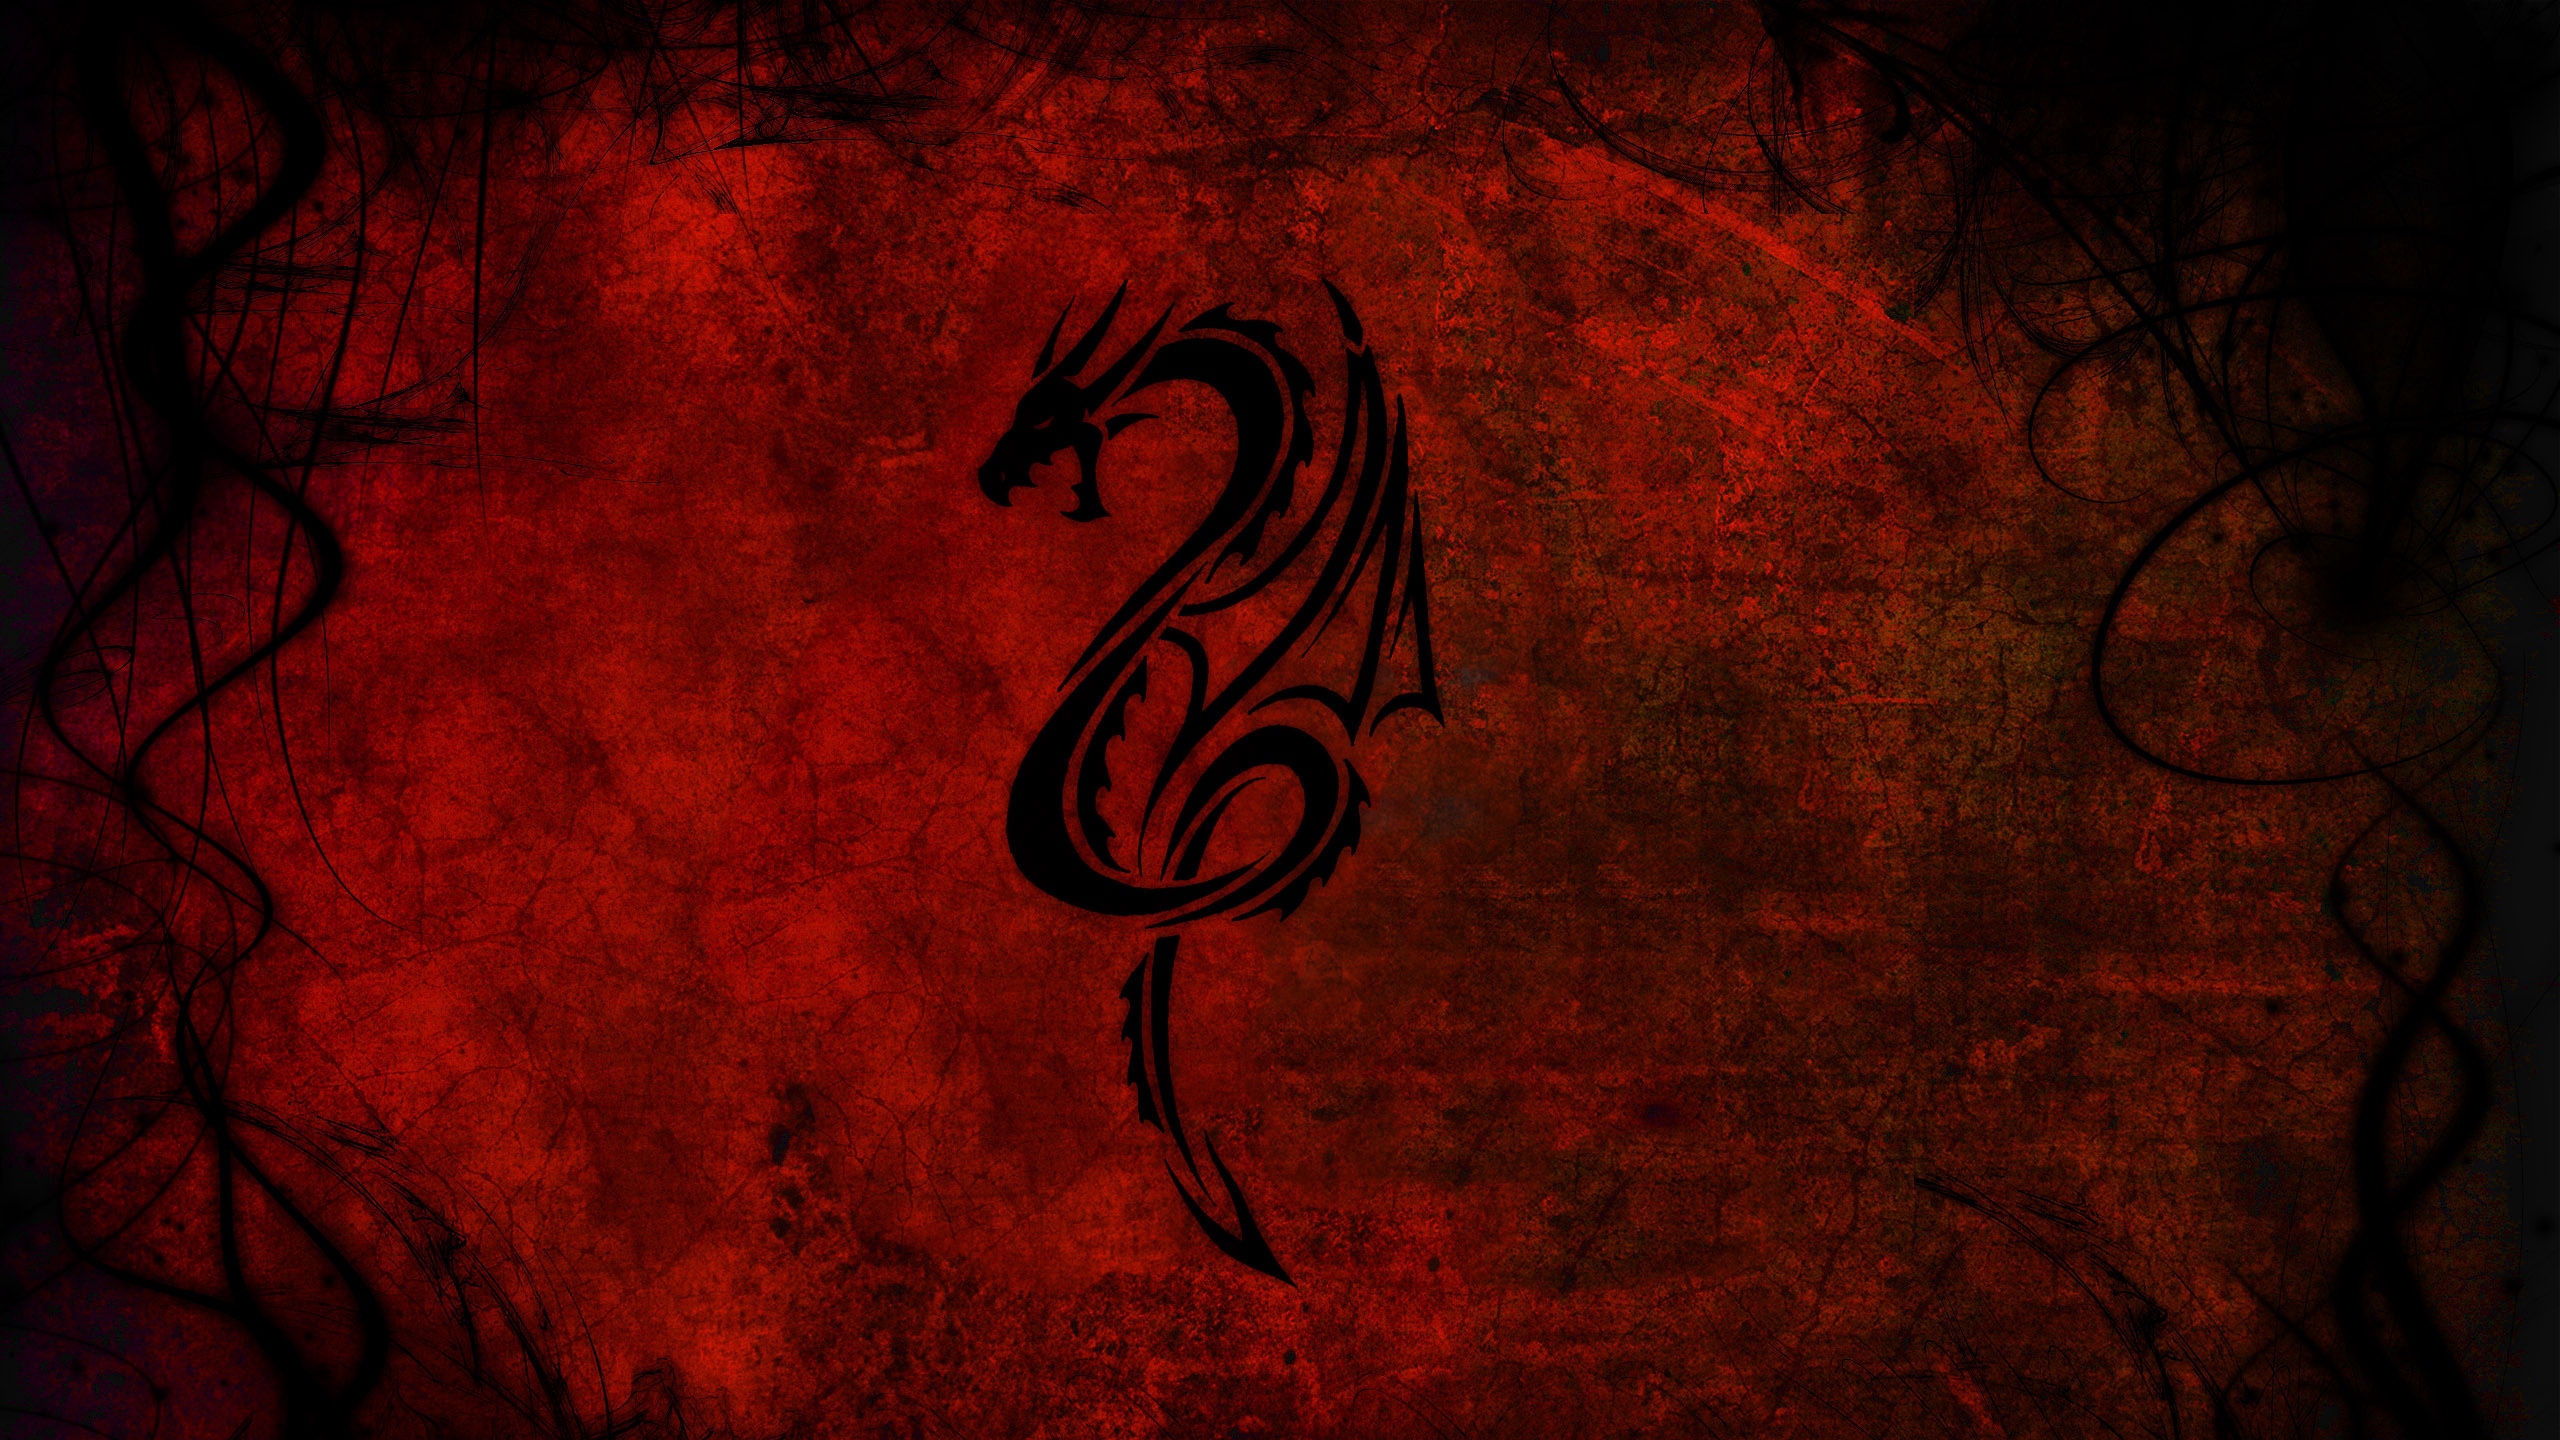 Red Dragon Wallpapers 1080p - Red And Black Wallpaper 1080p - HD Wallpaper 